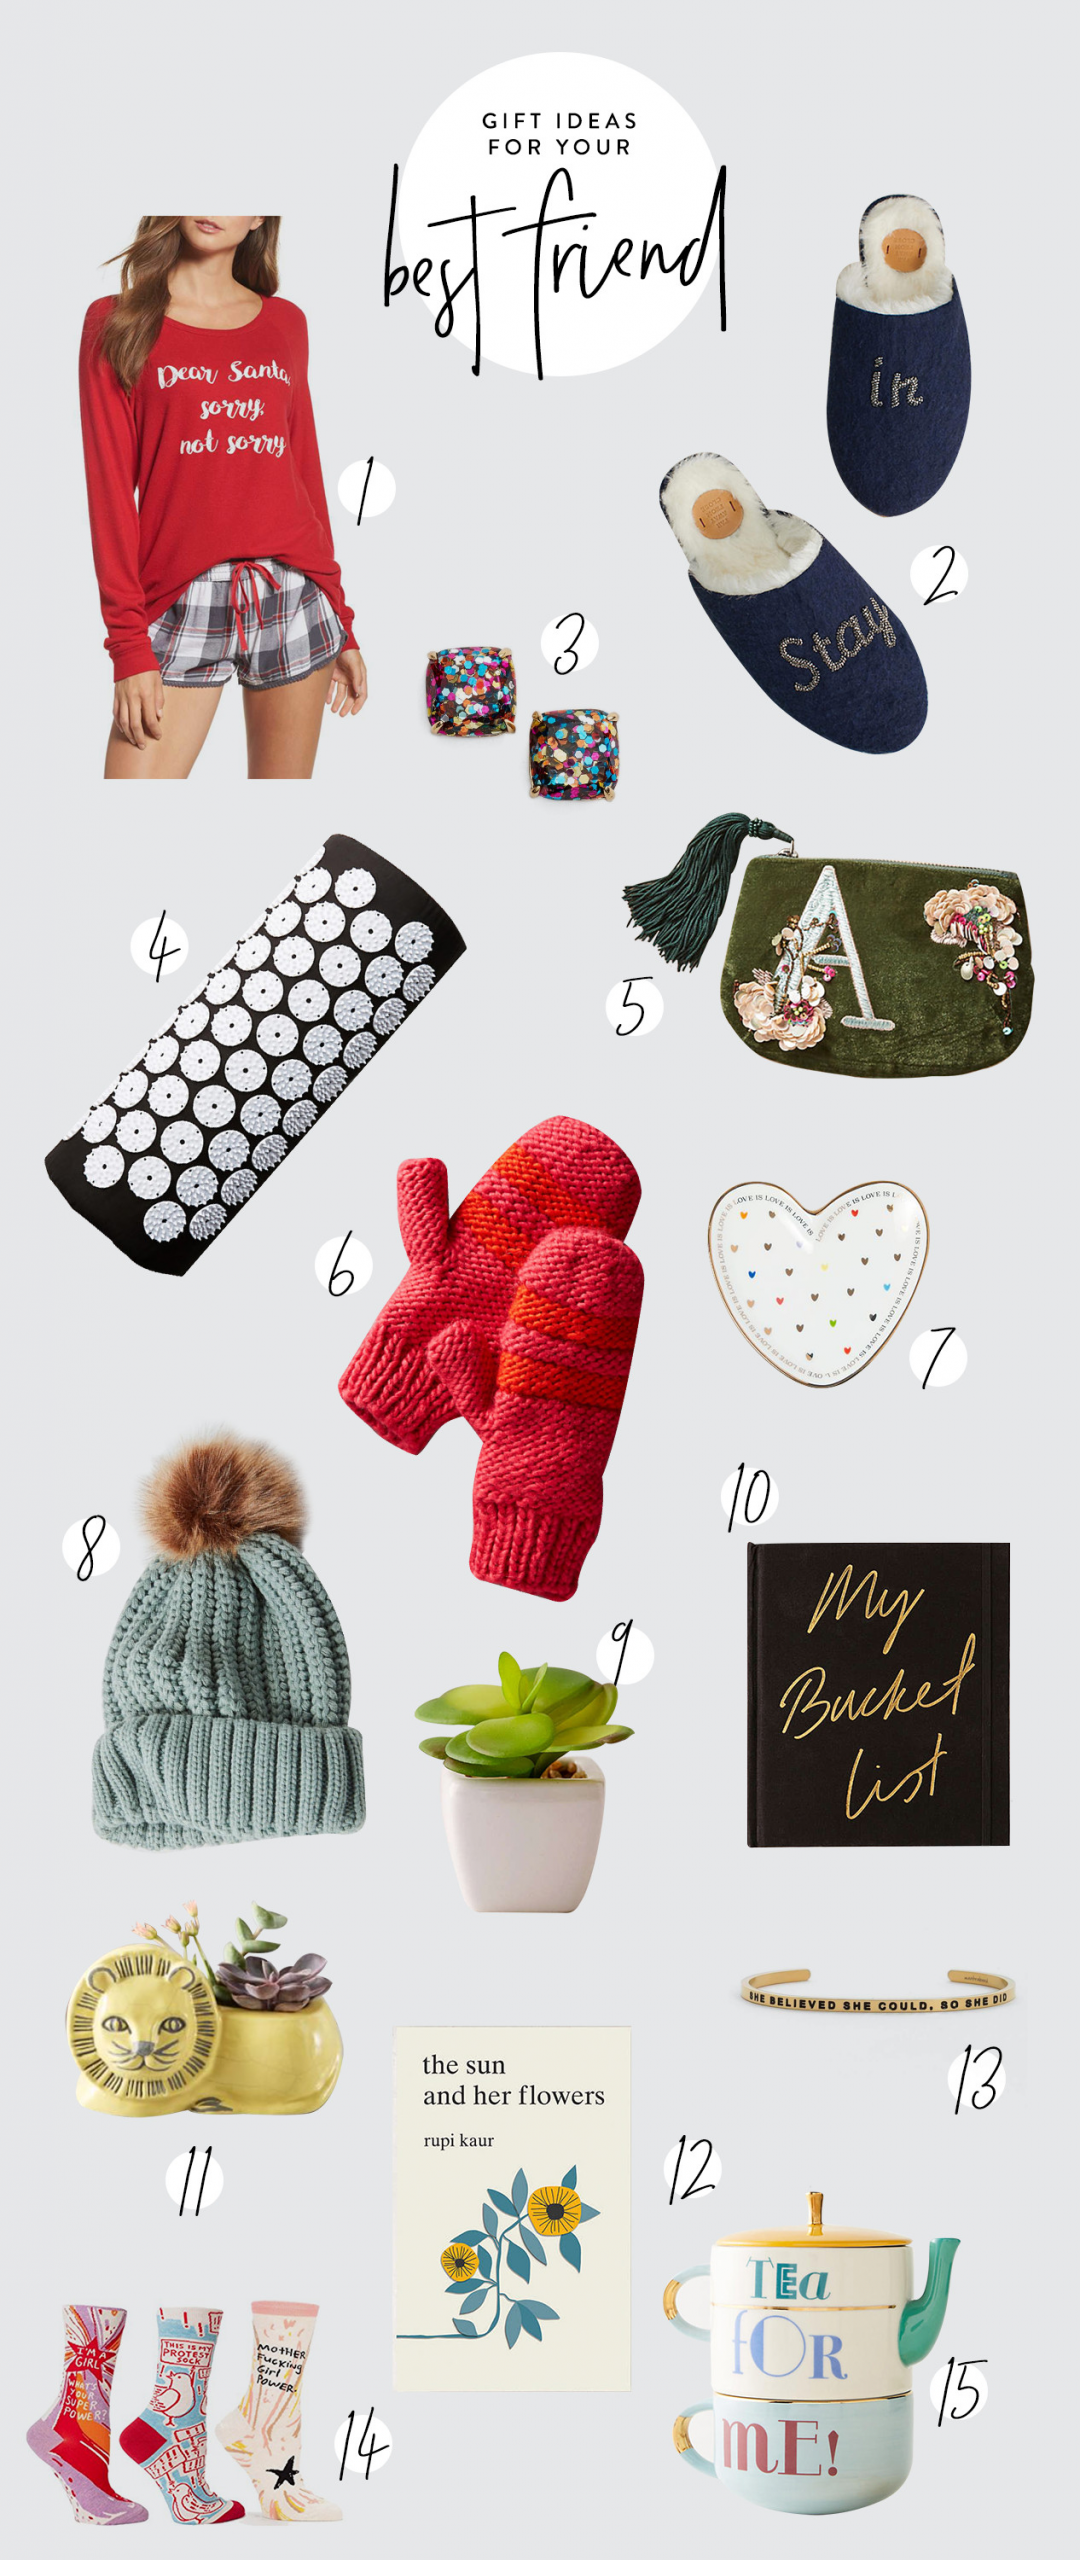 Best Gift Ideas
 The Ultimate Guide for Holiday Gift Ideas